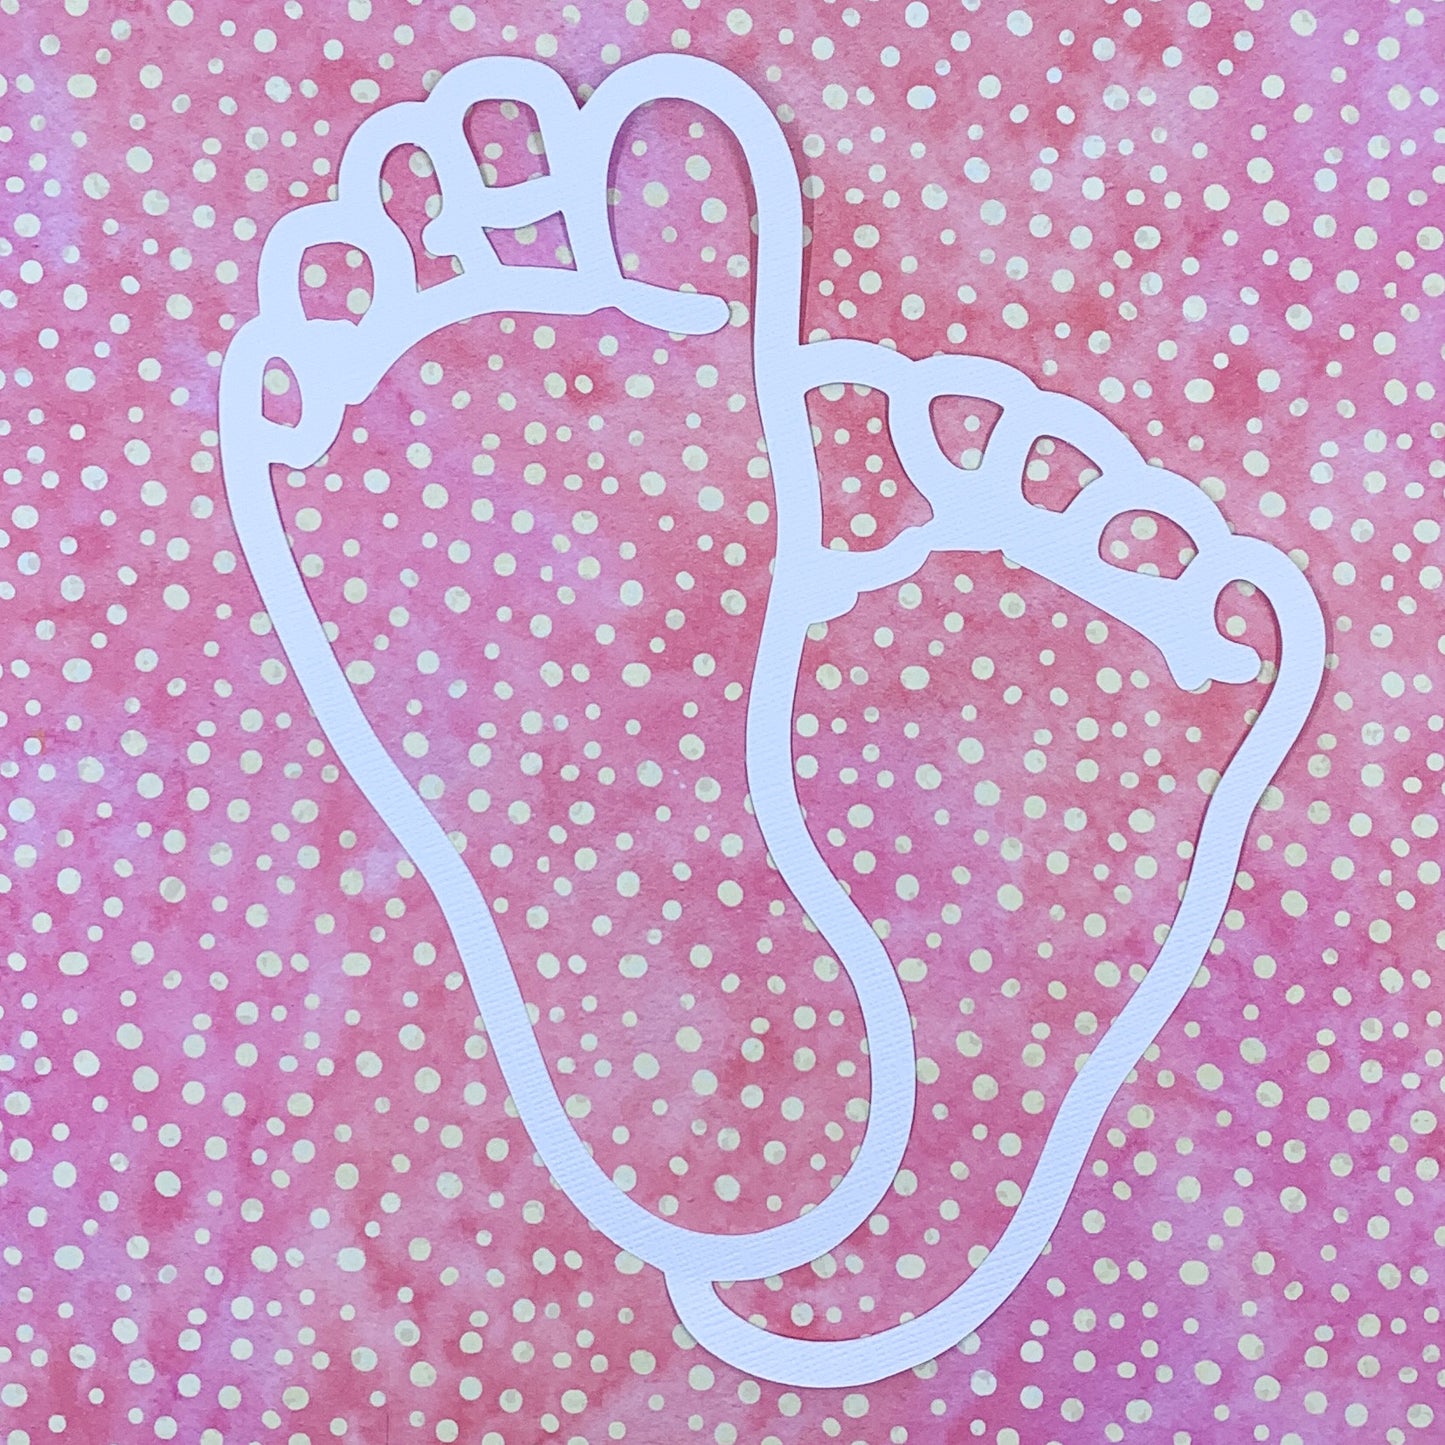 Tropicana - Feet (large) 7.5"x6" White Linen Cardstock Picture-Cut - Designed by Alicia Redshaw